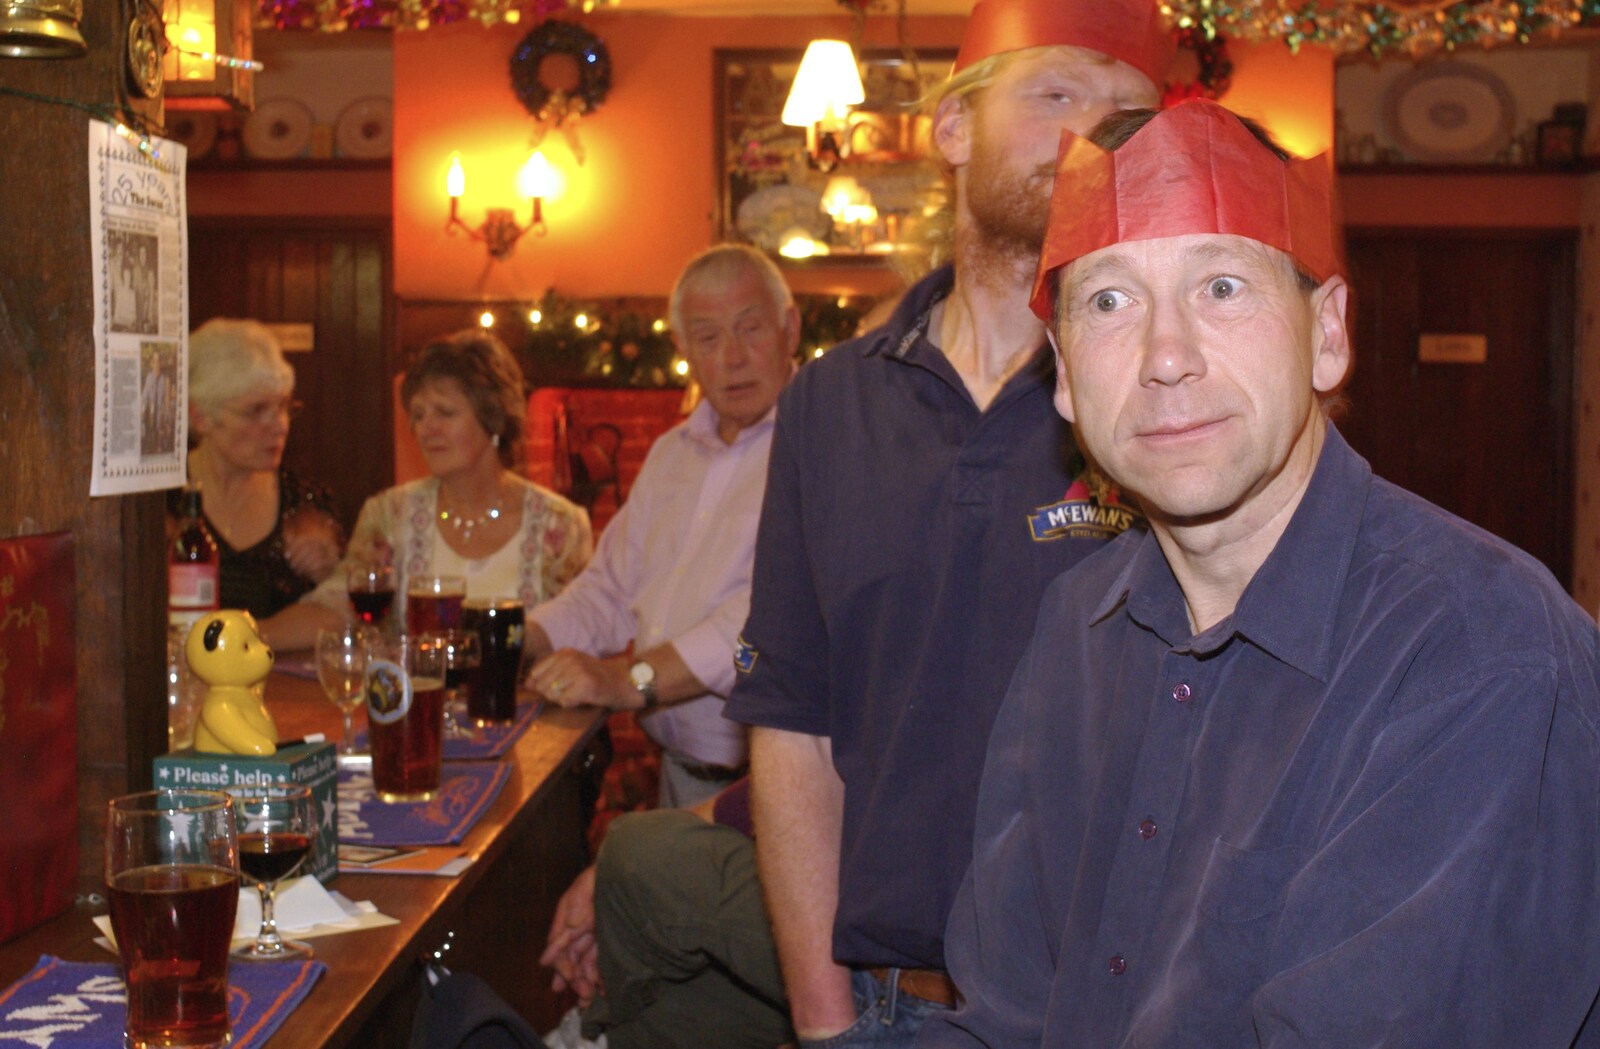 The BSCC Christmas Dinner, The Swan Inn, Brome, Suffolk - 6th December 2008: Apple with his hat on